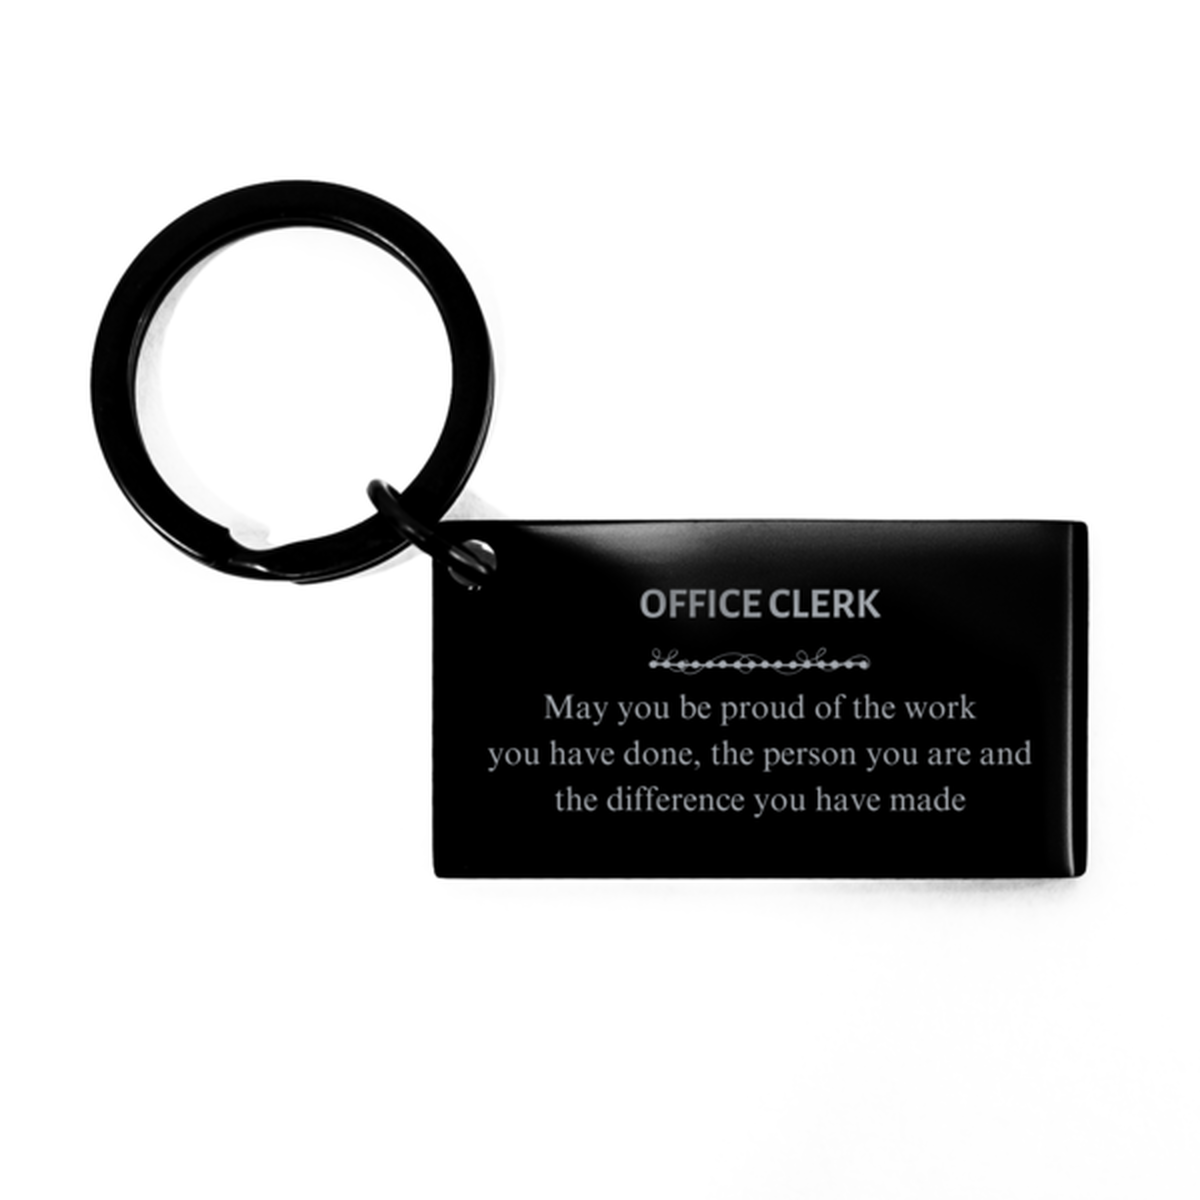 Physician May you be proud of the work you have done, Retirement Office Clerk Keychain for Colleague Appreciation Gifts Amazing for Office Clerk